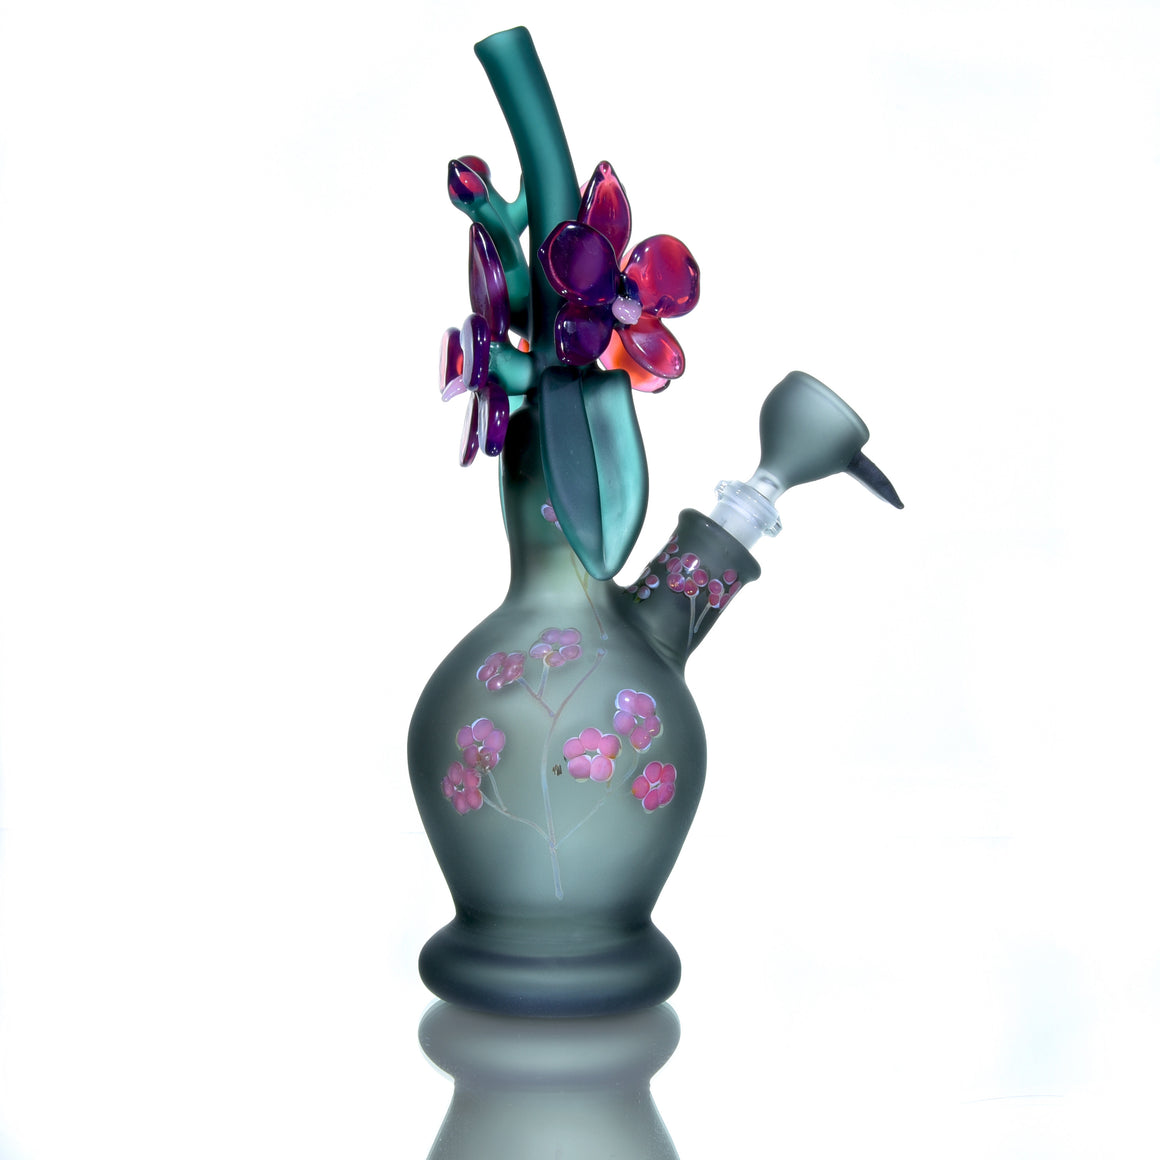 Frosted Floral Pattern Bouquet Mini Tube w/ Removable Downstem - Purple Orchid - 10mm Female